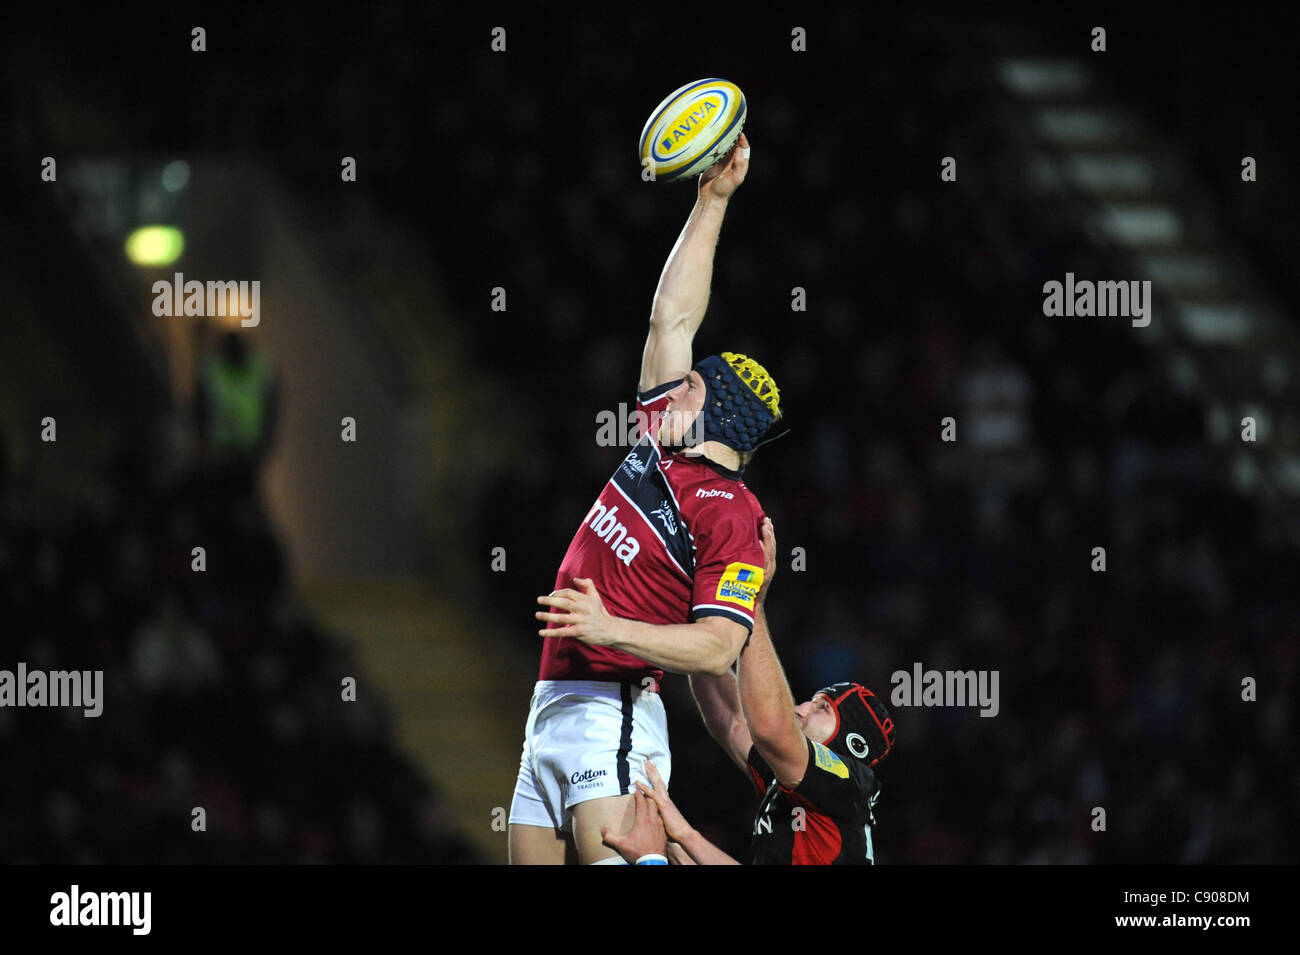 06.11.2011 Watford, England.  Sale win a line out during the Aviva Premiership game between Saracens and Sale Sharks. Stock Photo